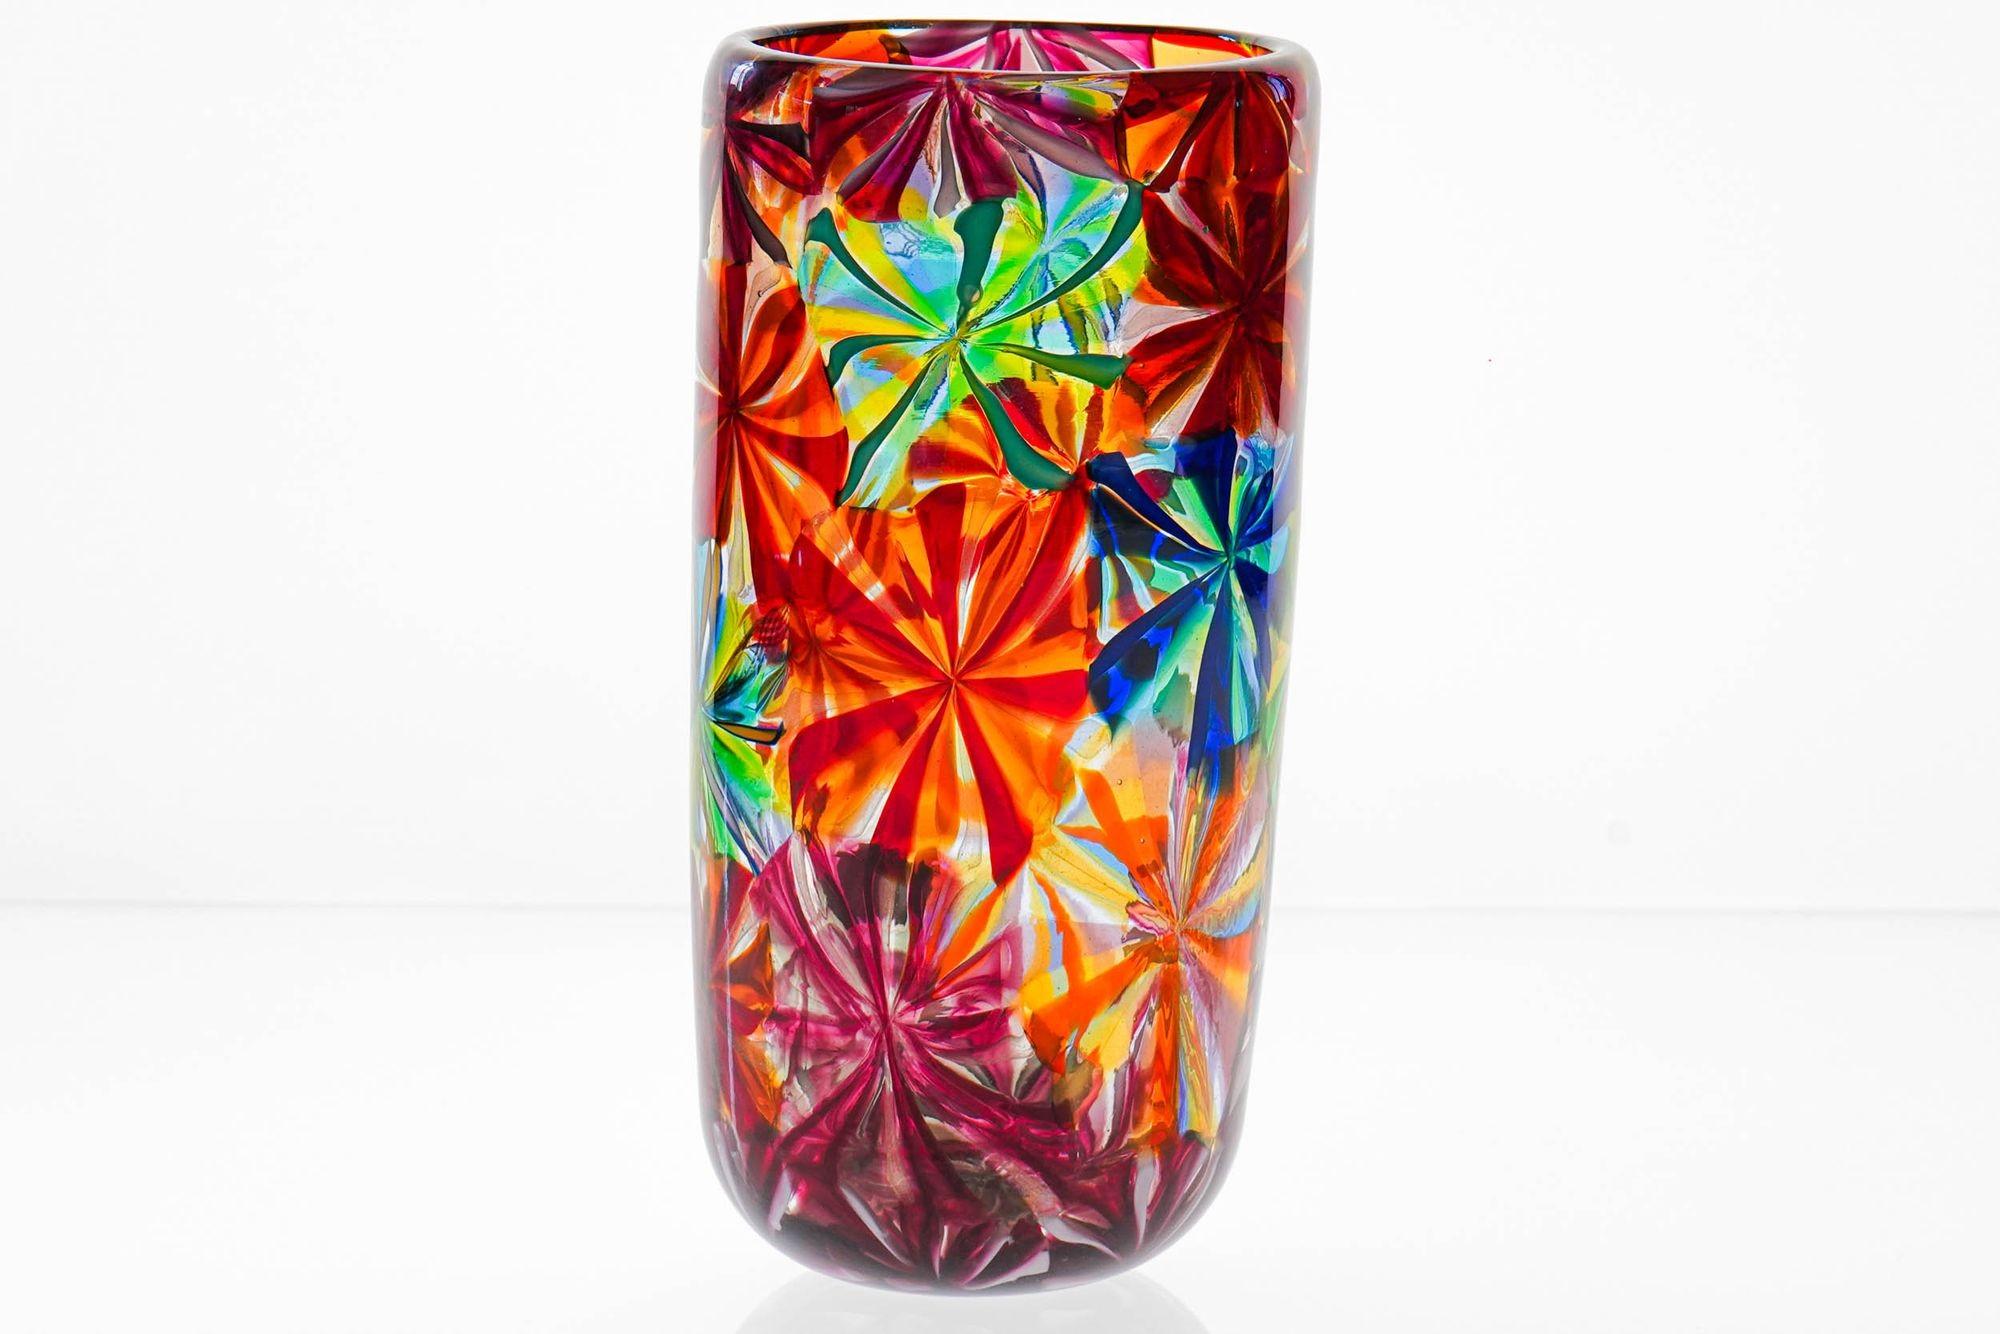 Splendid murano mosaic vase with a perfect color combination and complex mosaic technique.

The stellato finish is made by rolling canes of various color over a small blob of incandescent glass. The design is attained by using the glass scissors at